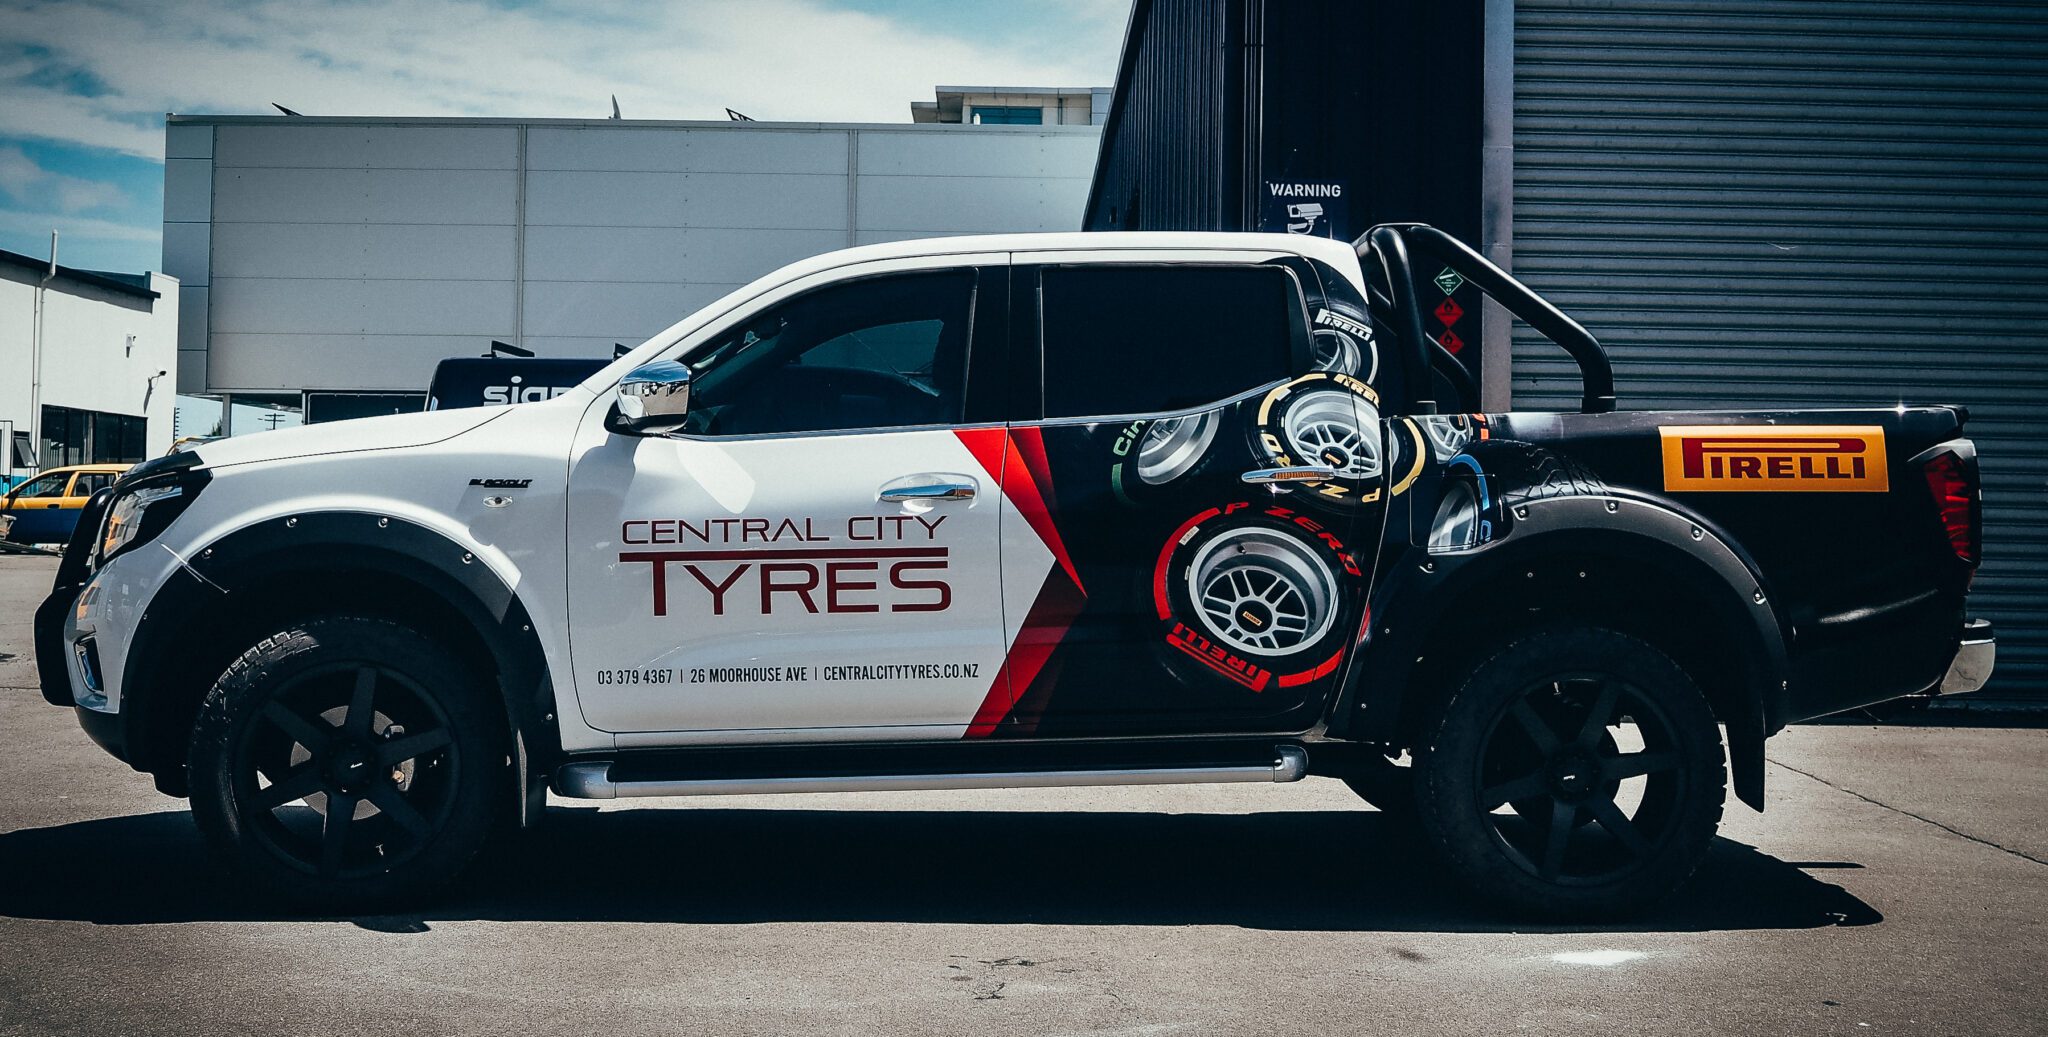 Central City Tyres Ute